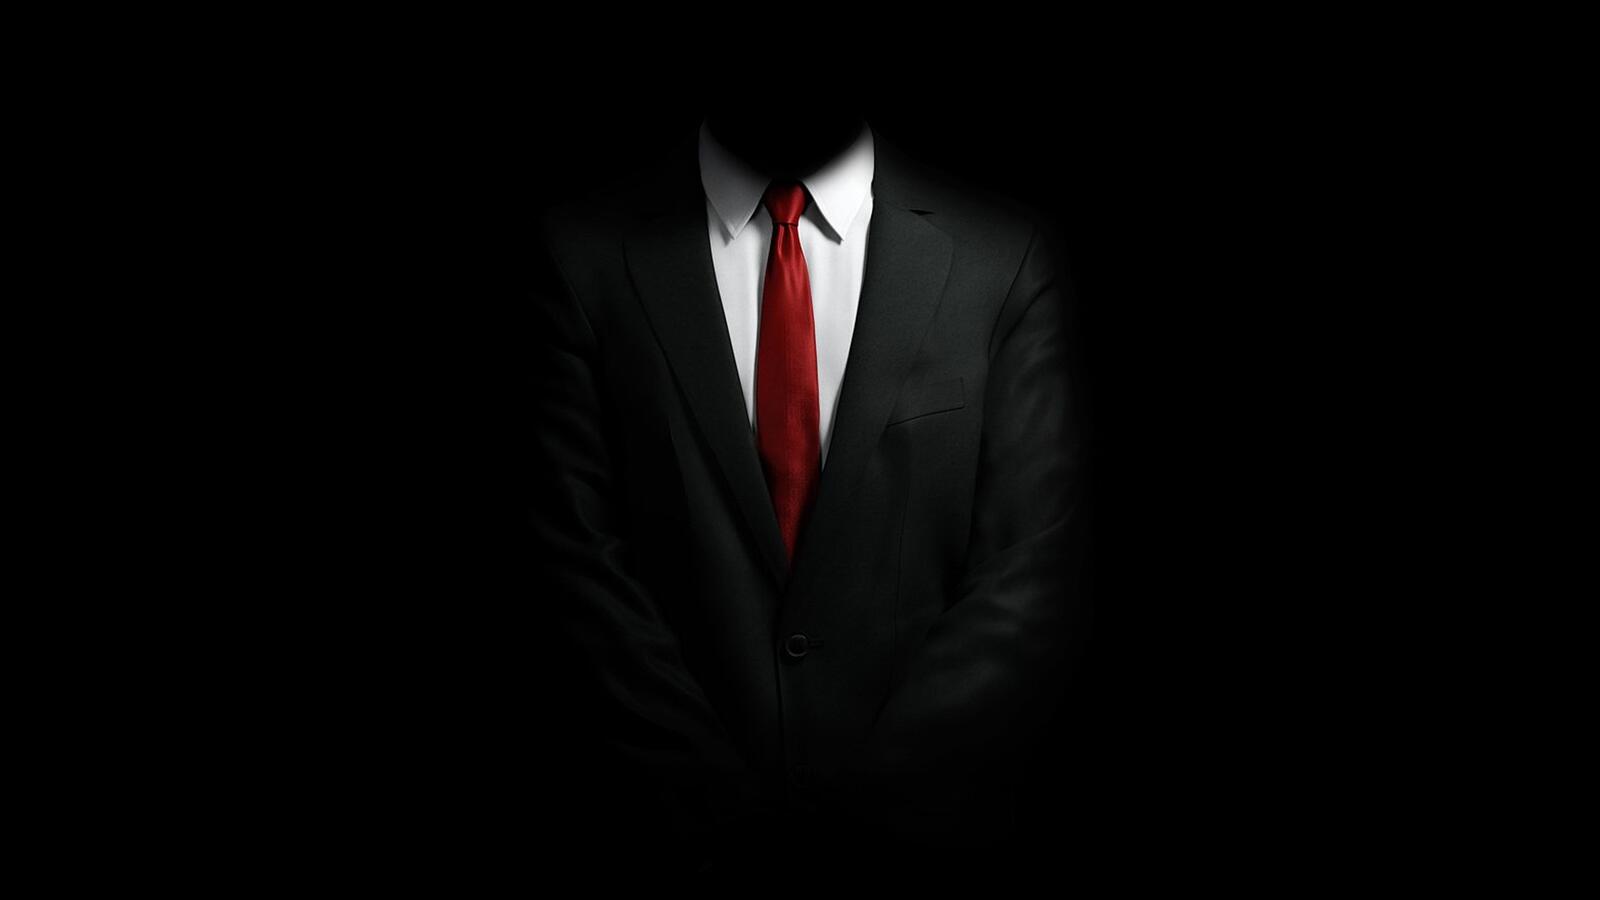 Wallpapers red tie black background games on the desktop